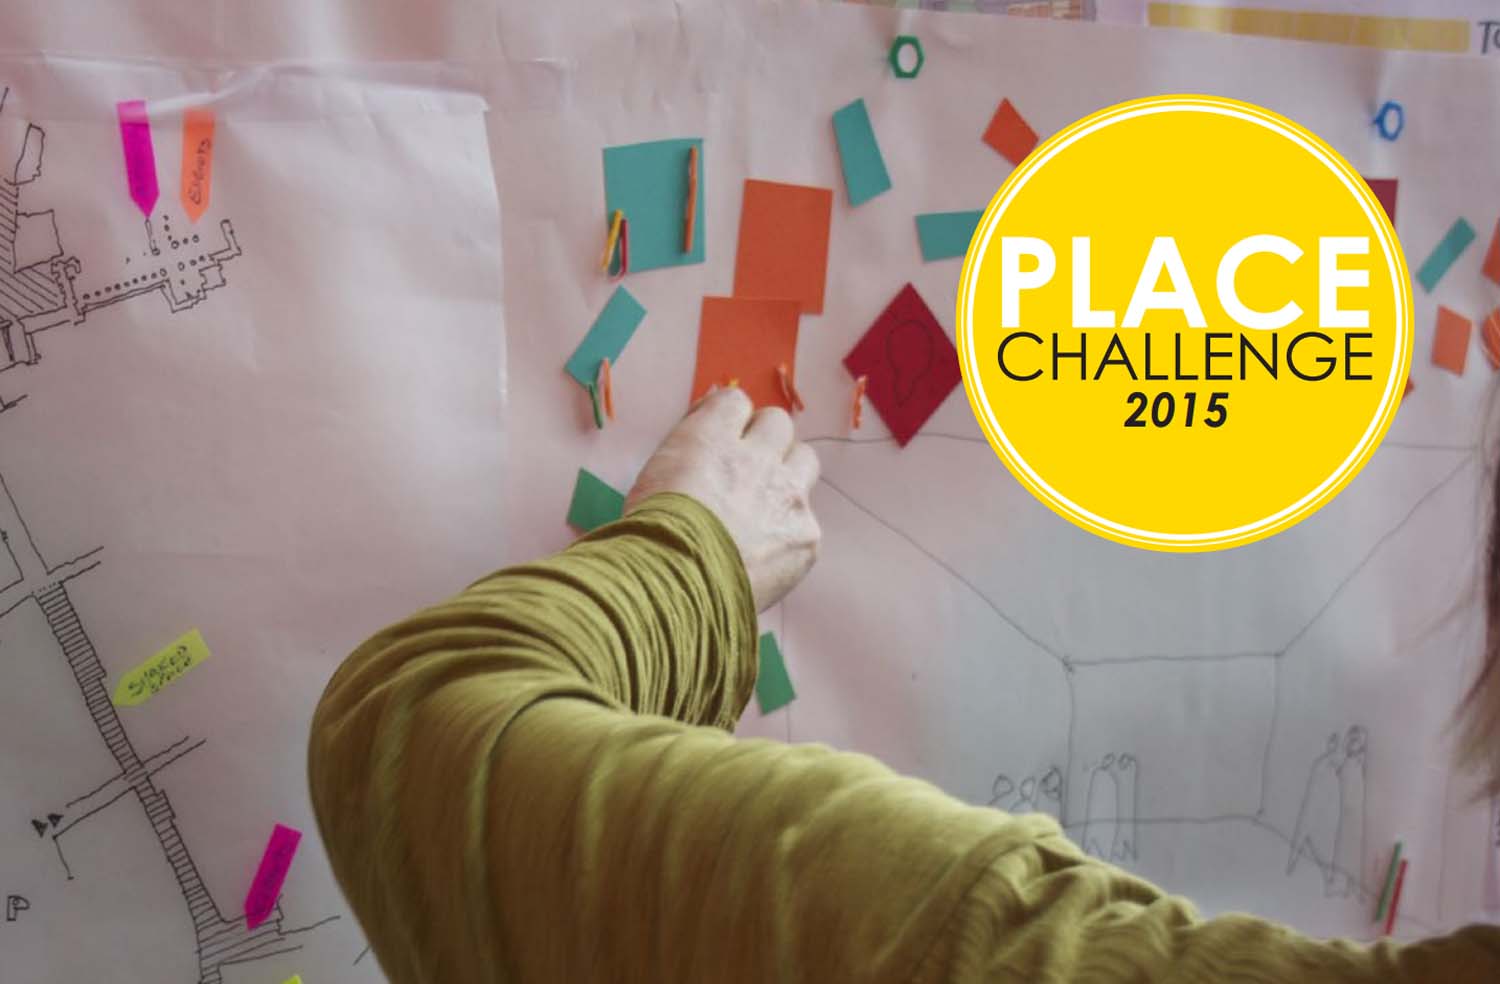 A close up image of a hand adding coloured notes to a white sheet of paper with a yellow circle with the words Place Challenge 2015 written on it